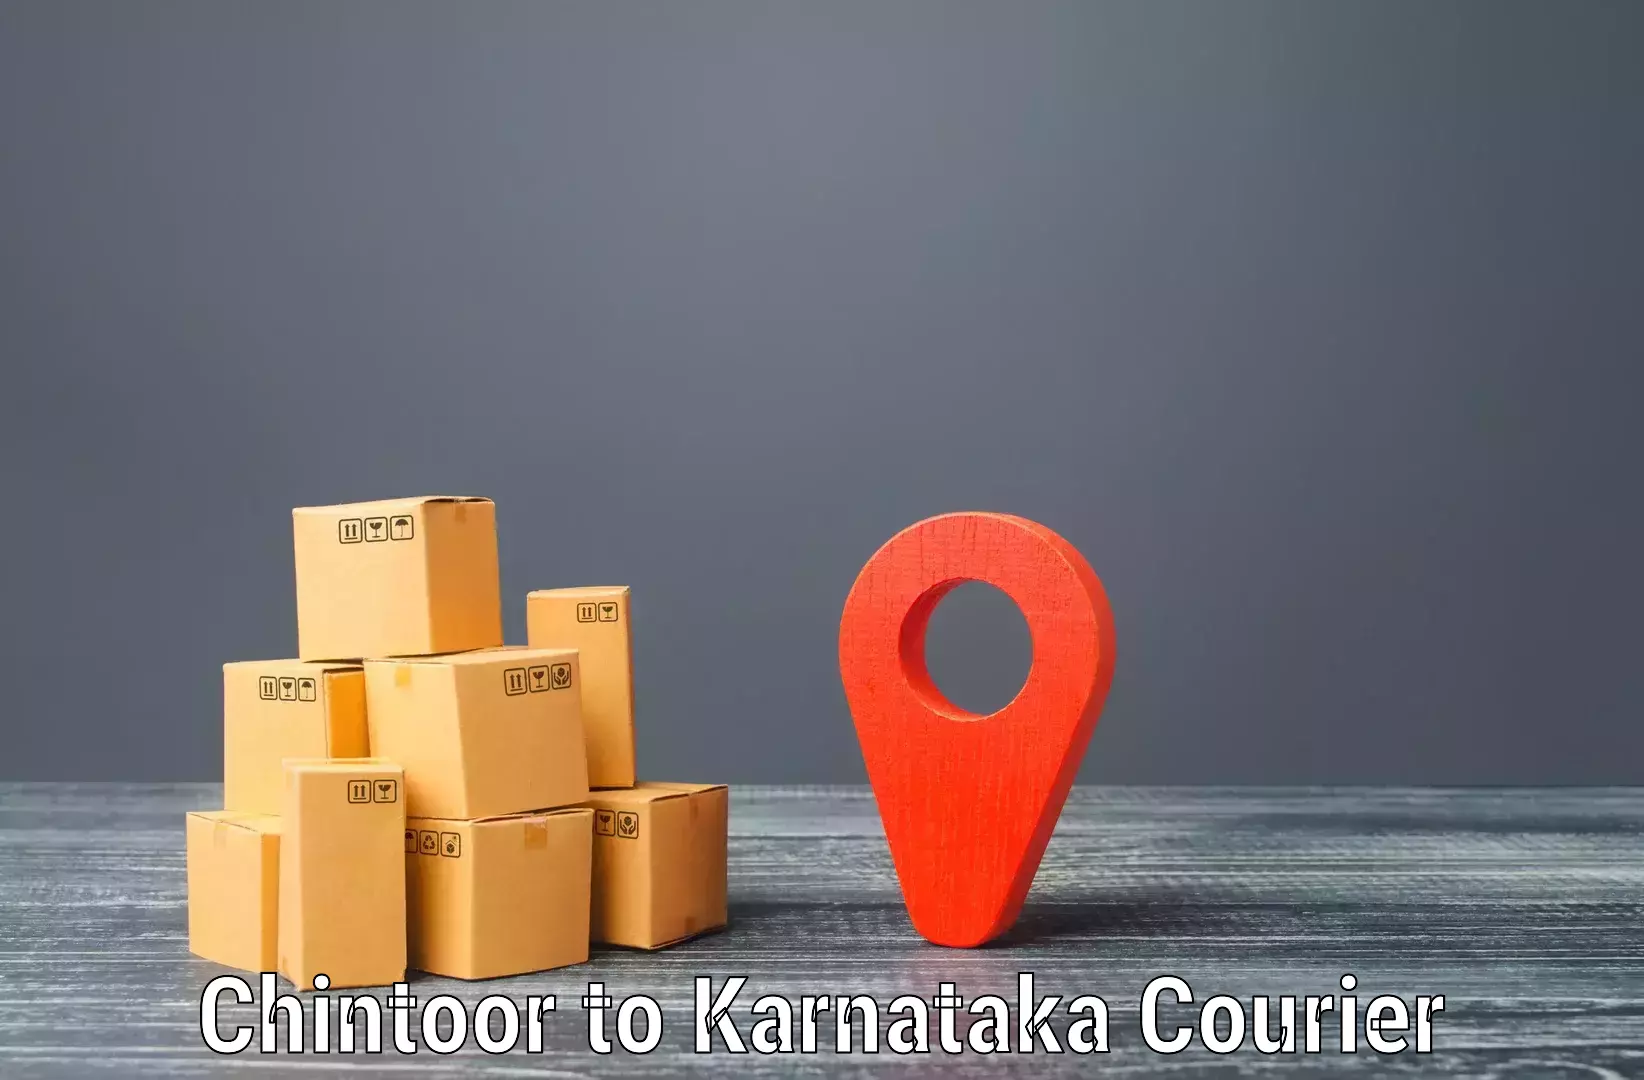 Customer-focused courier Chintoor to Srirangapatna